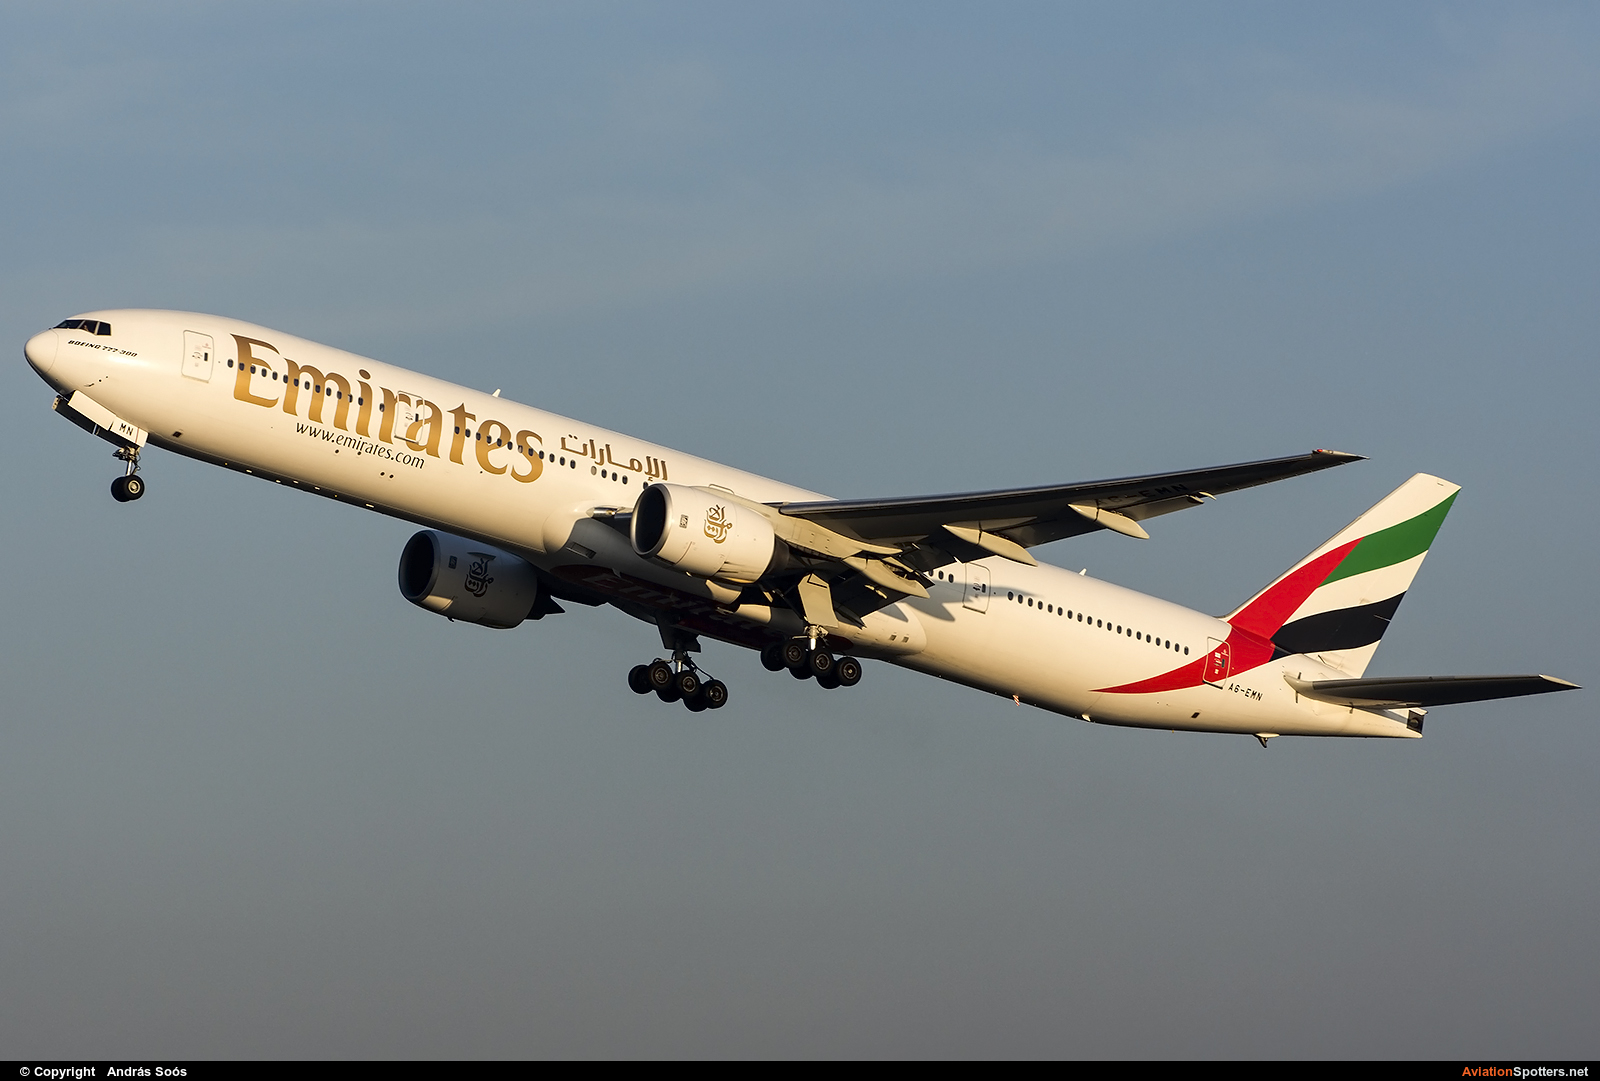 Emirates Airlines  -  777-300  (A6-EMN) By András Soós (sas1965)